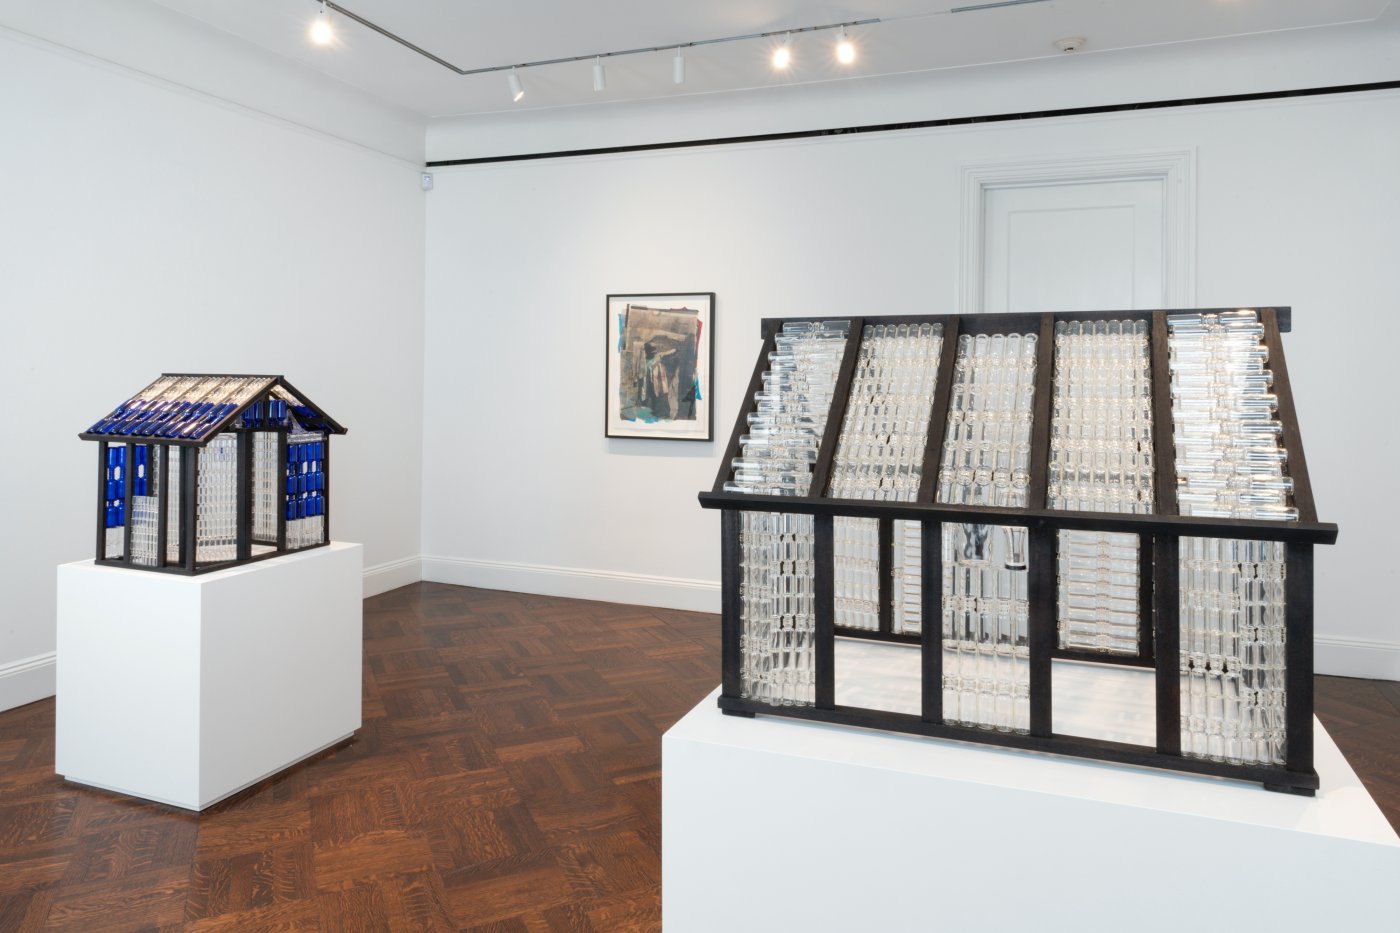 Installation image for Mildred Howard: A Sonata in Four Parts, at Franklin Parrasch Gallery